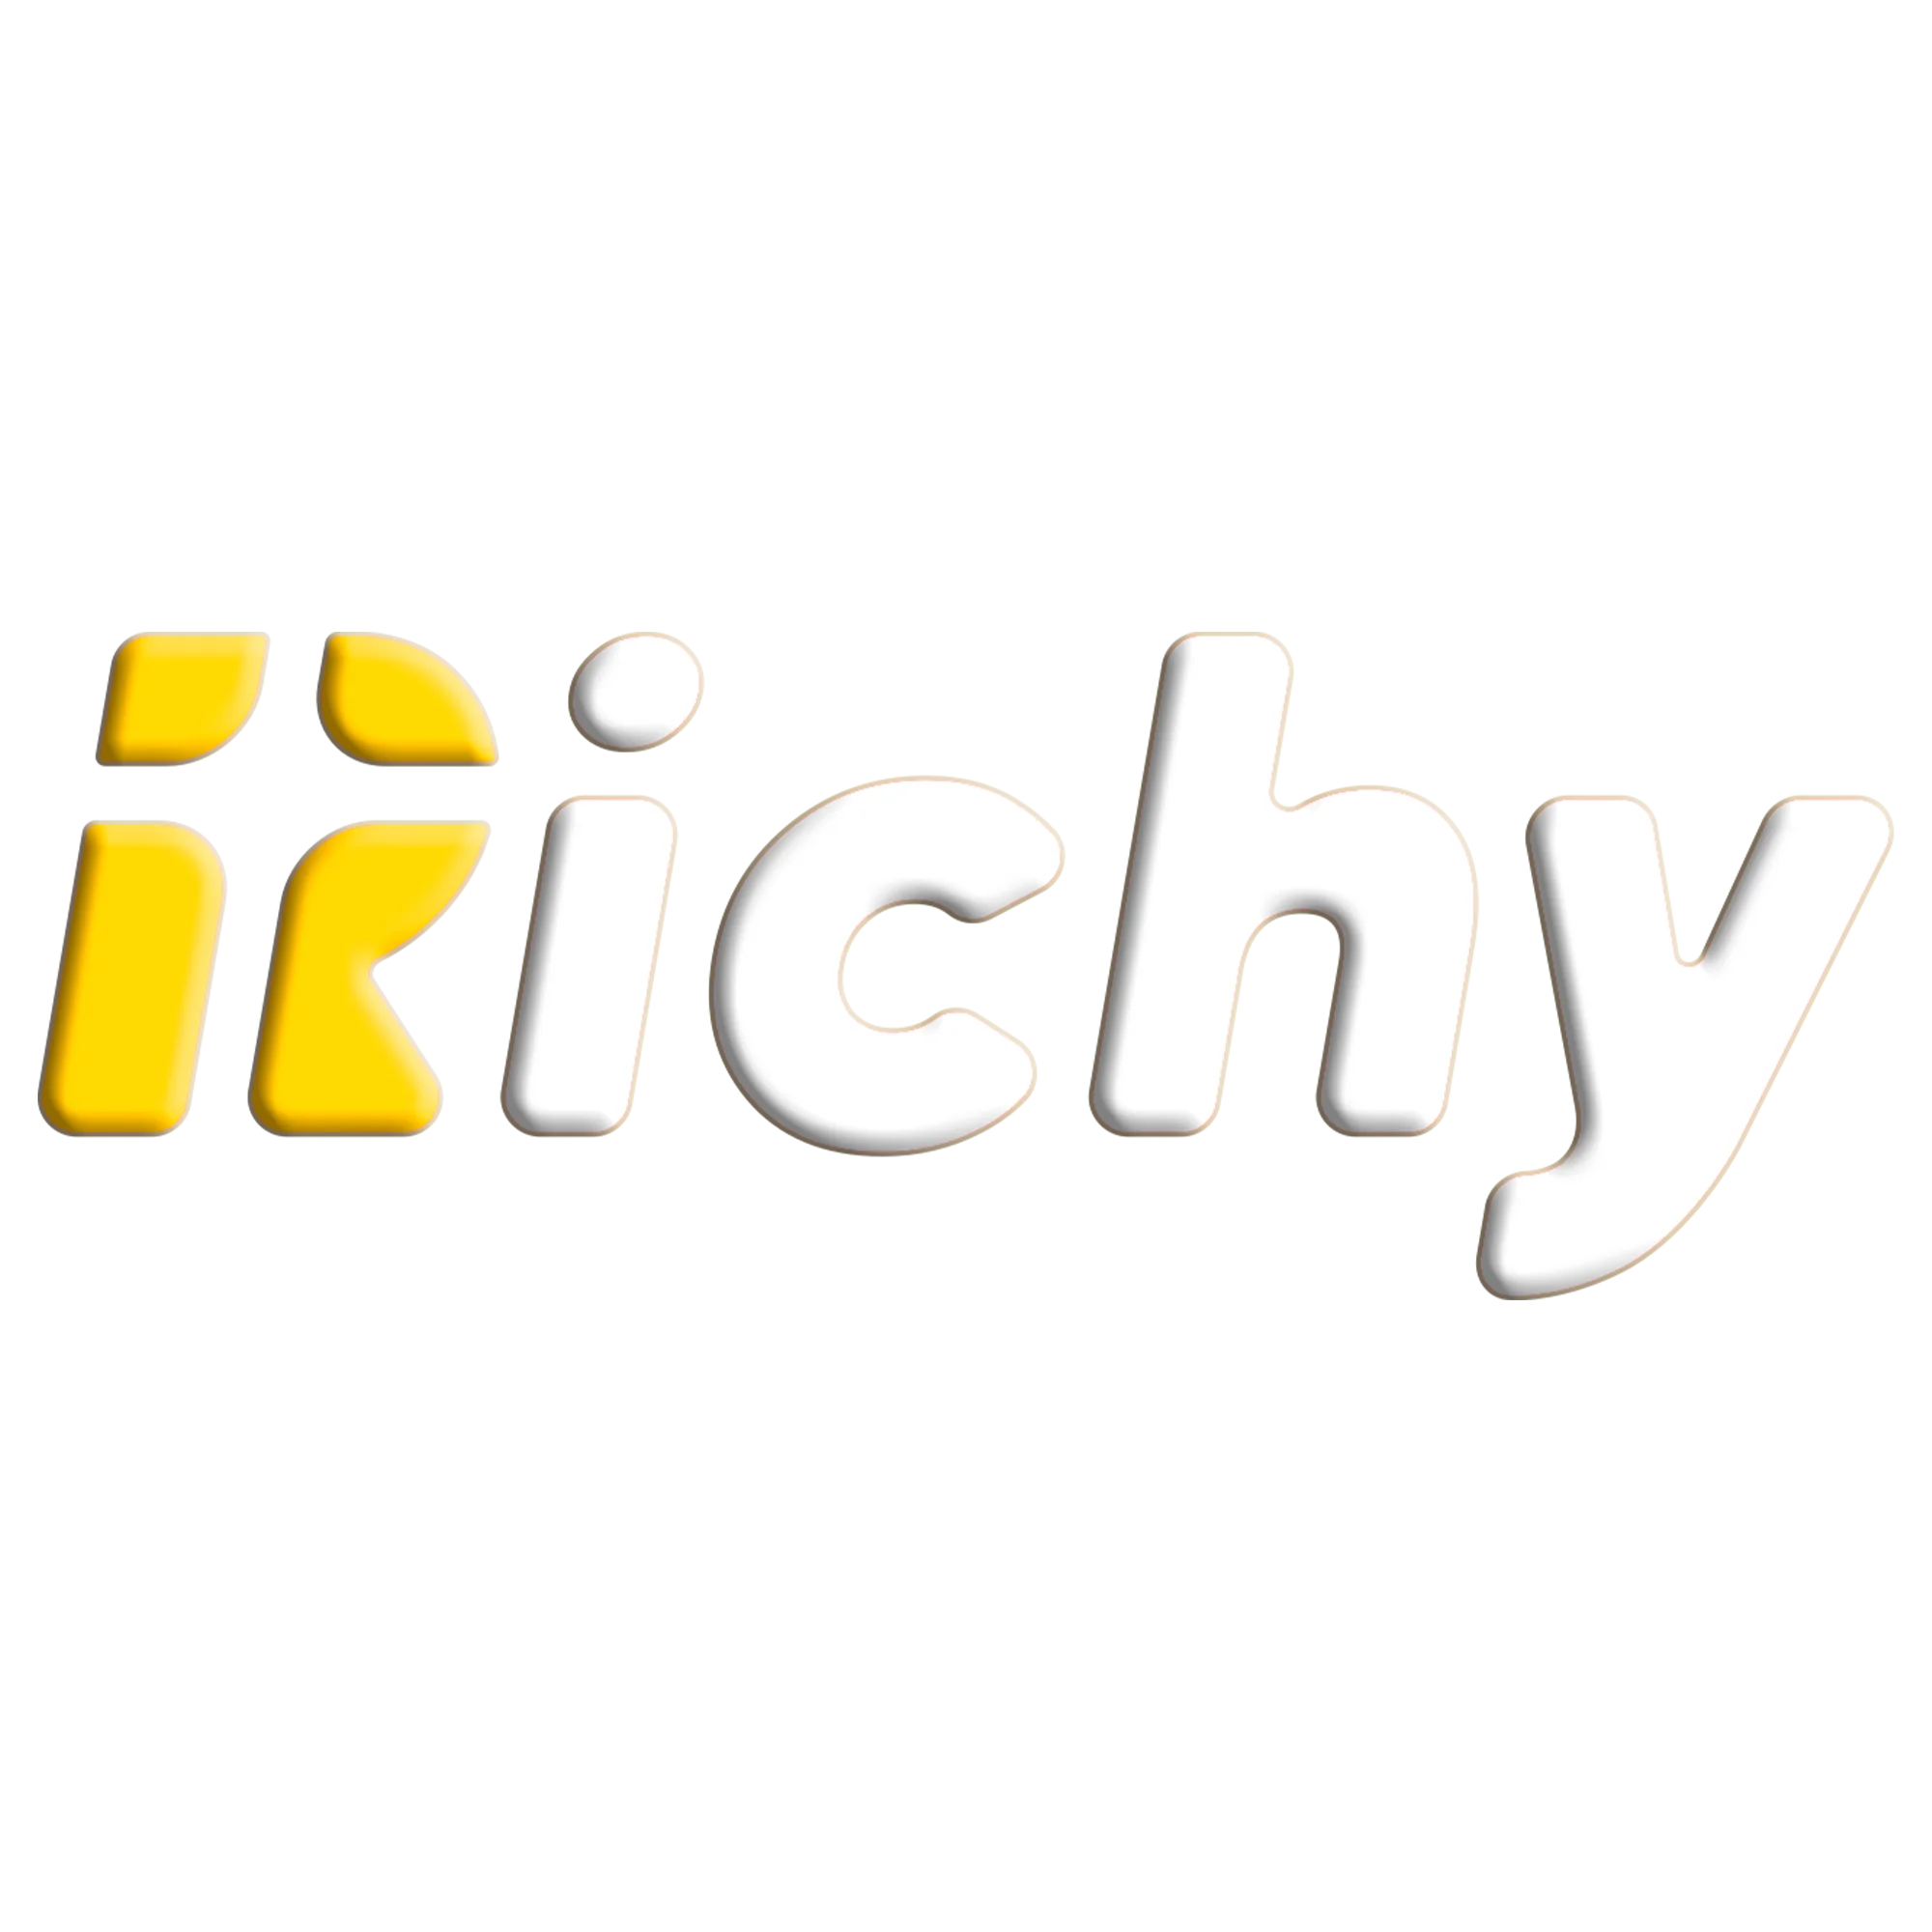 Richy Bet Review